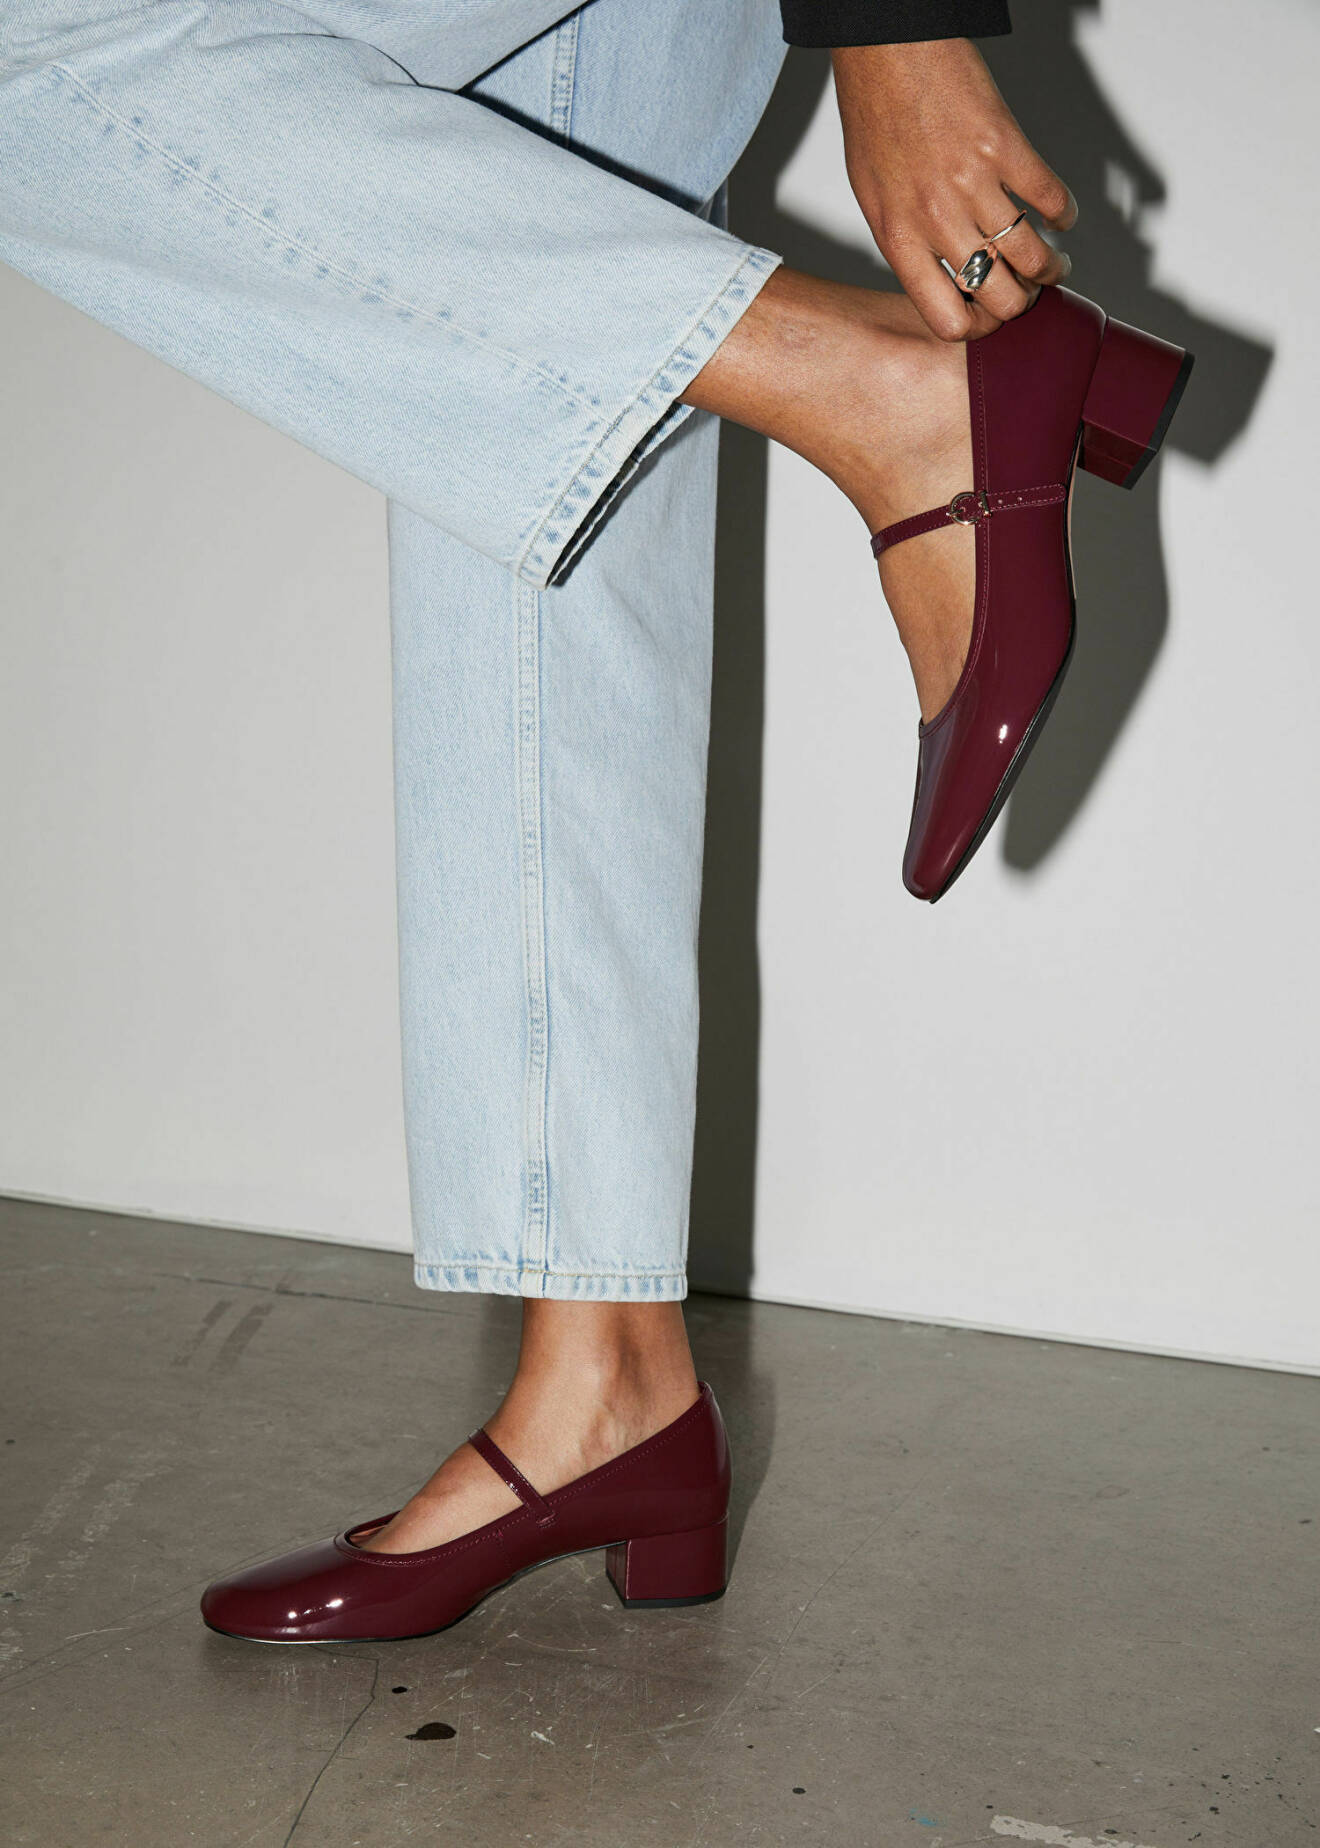 mary jane pumps